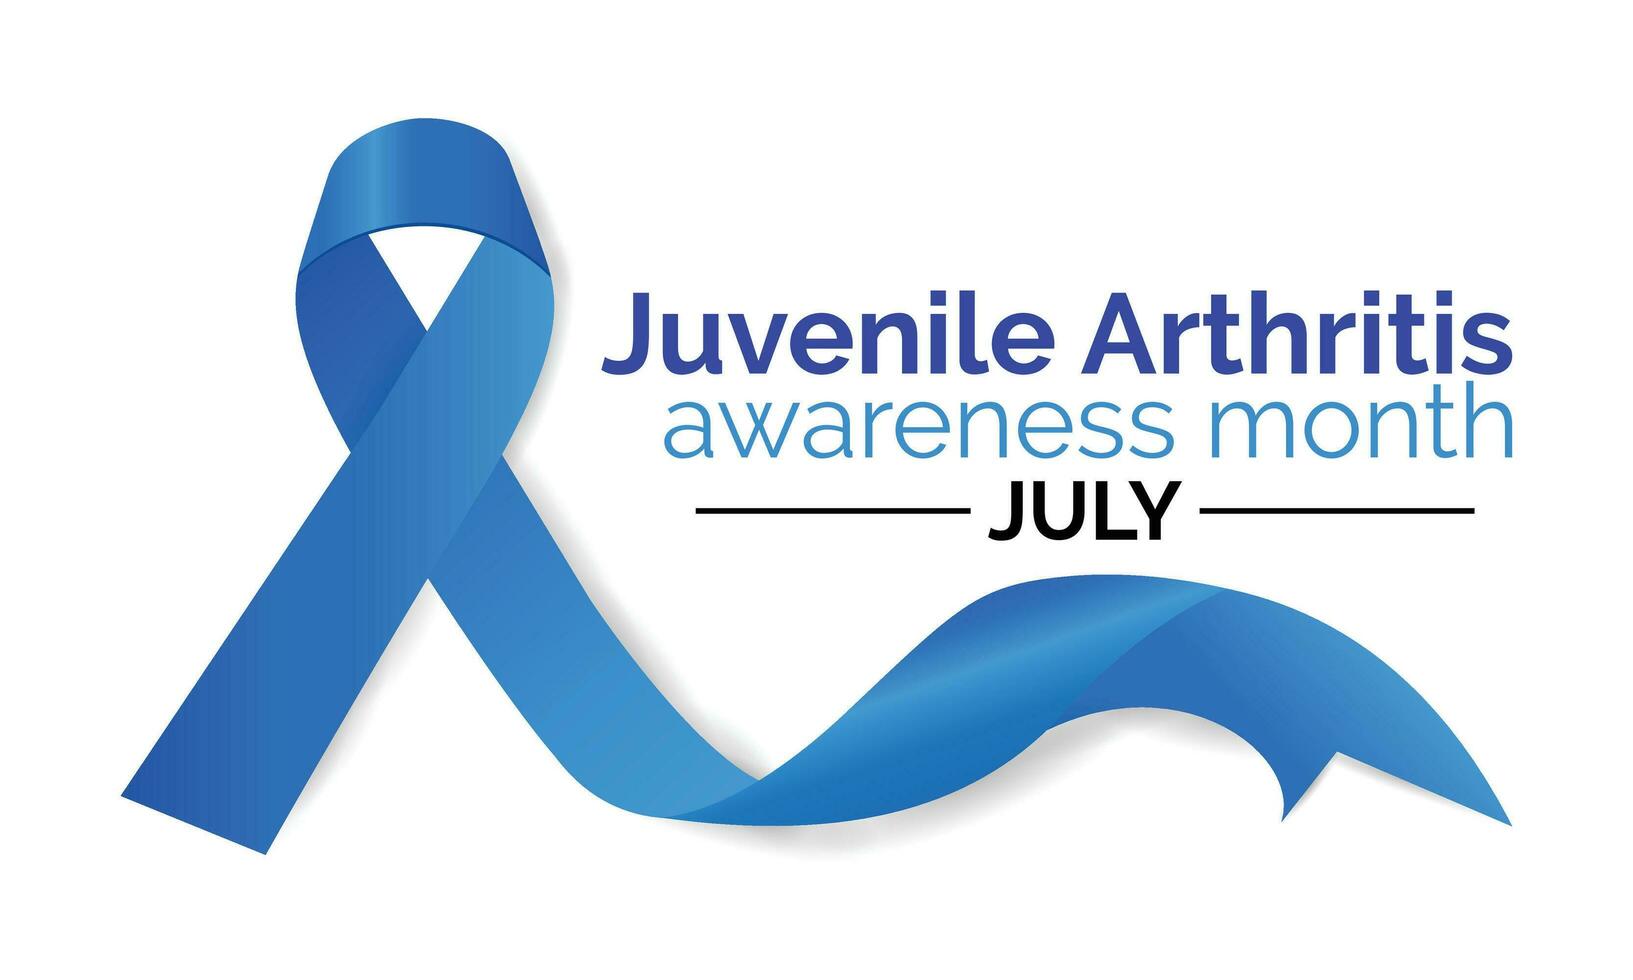 Juvenile Arthritis awareness month is observed every year in July. vector banner, poster, card, background design. Arthritis is a term often used to mean any disorder that affects joints